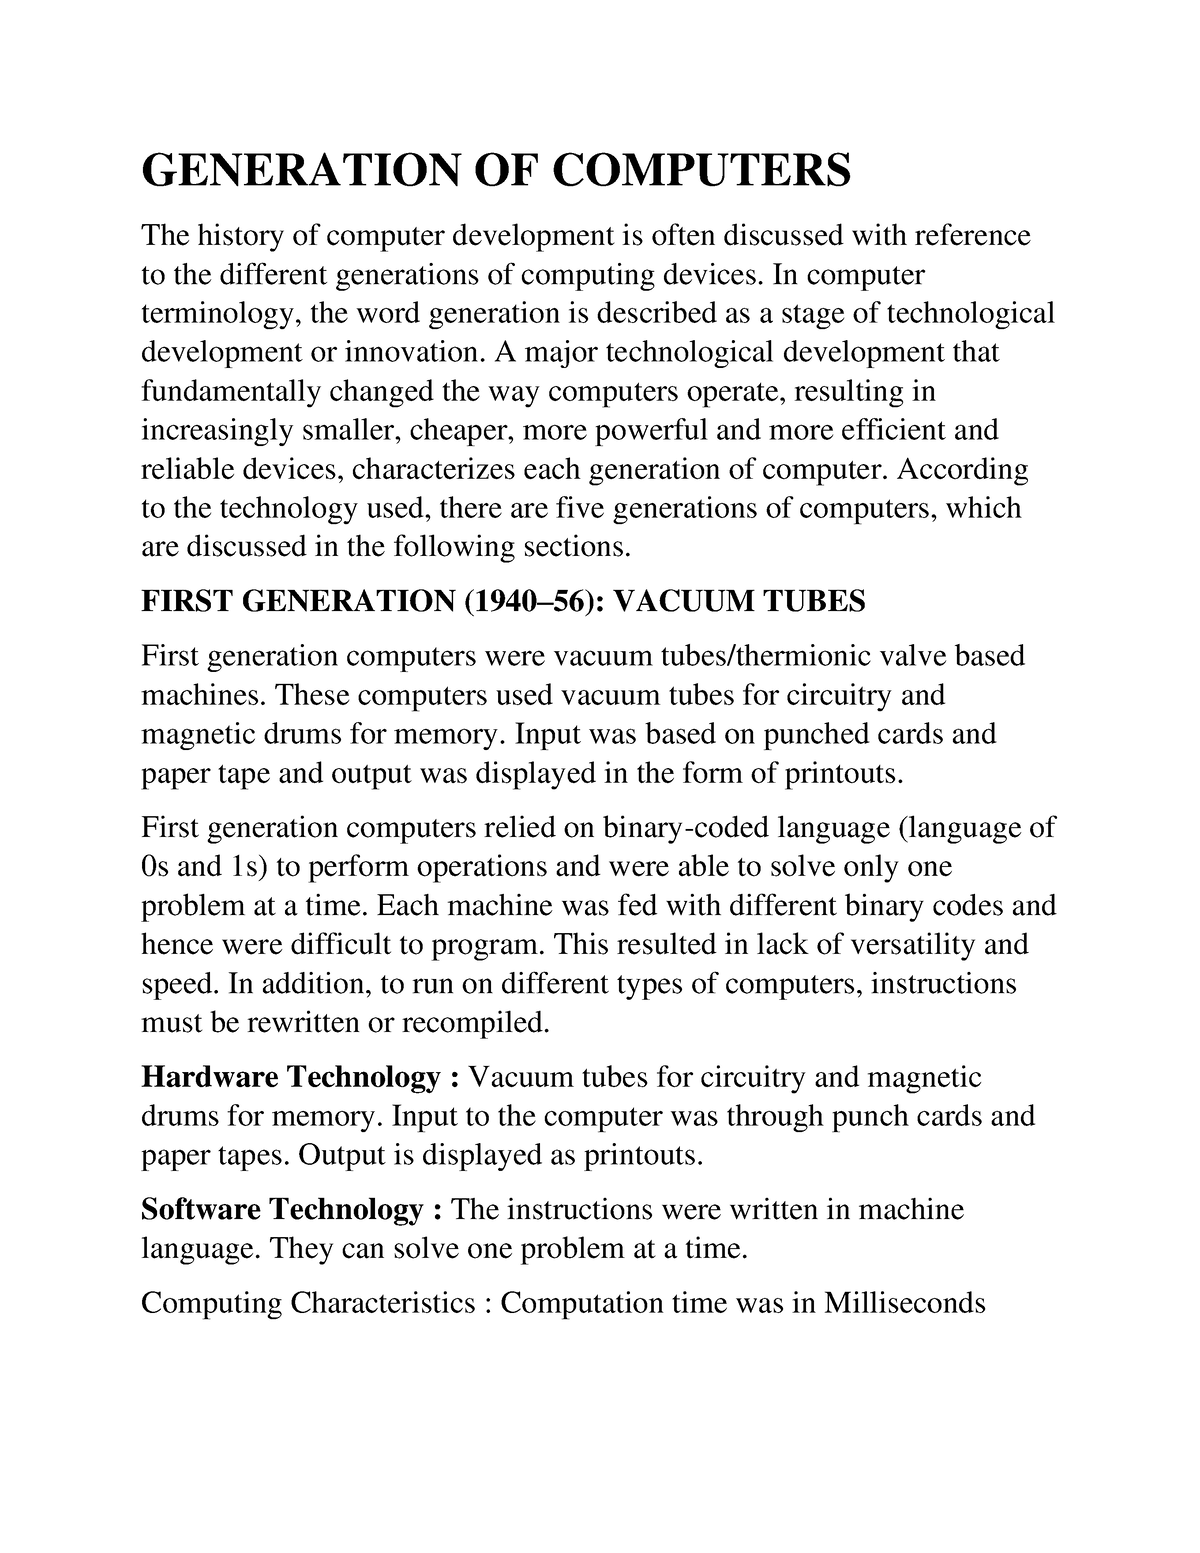 generation of computer essay in english